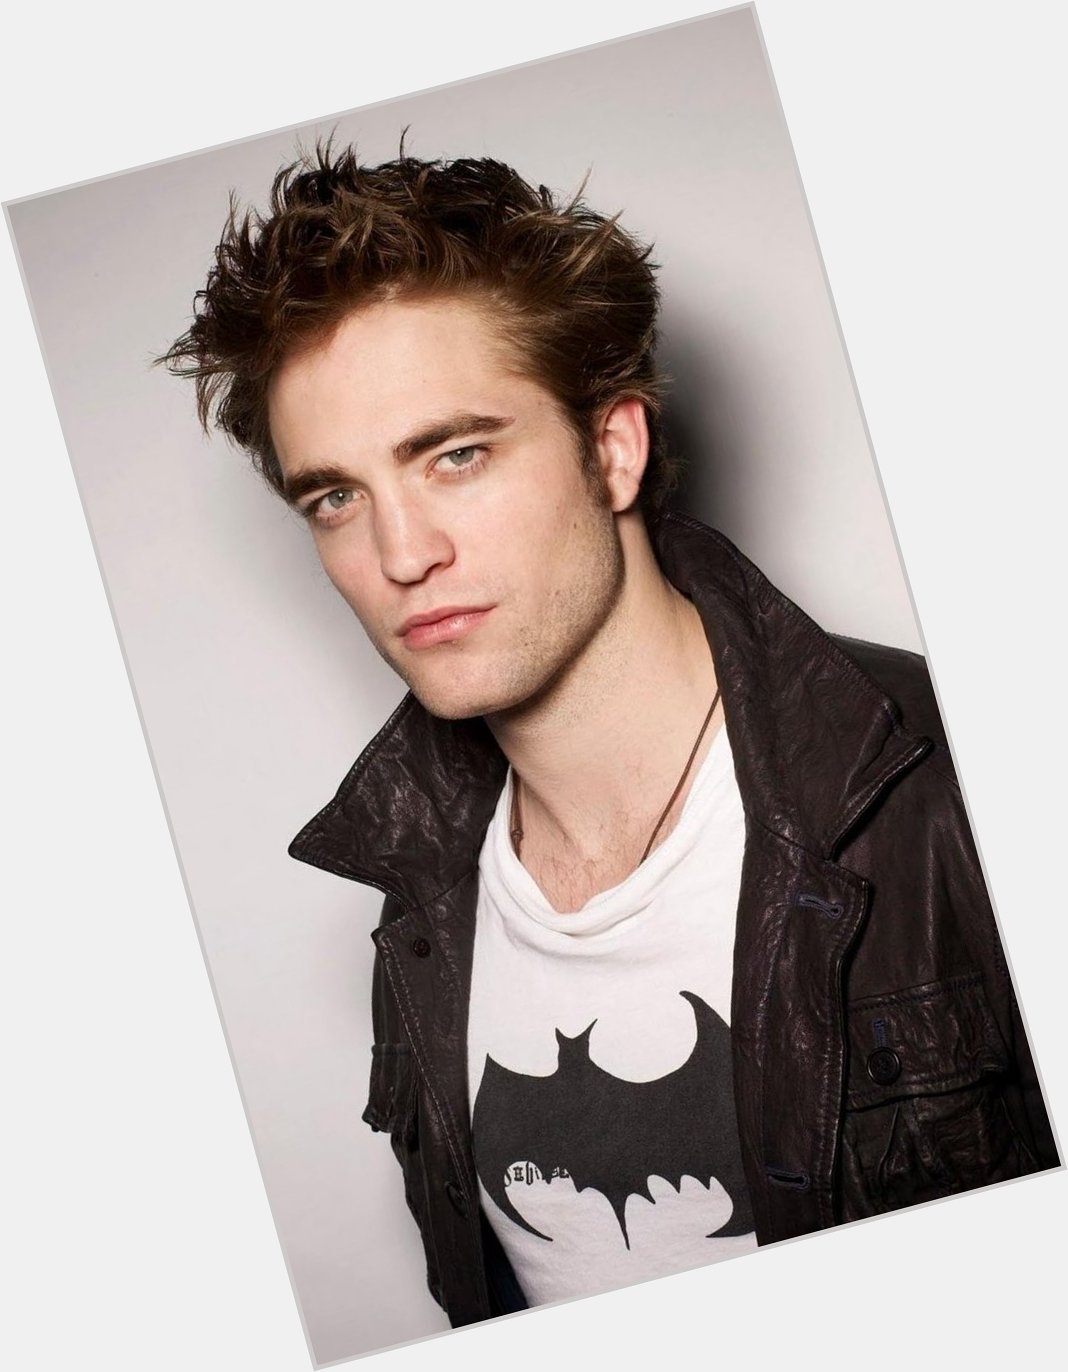 Happy birthday to robert pattinson!!

my favourite actor of all time  